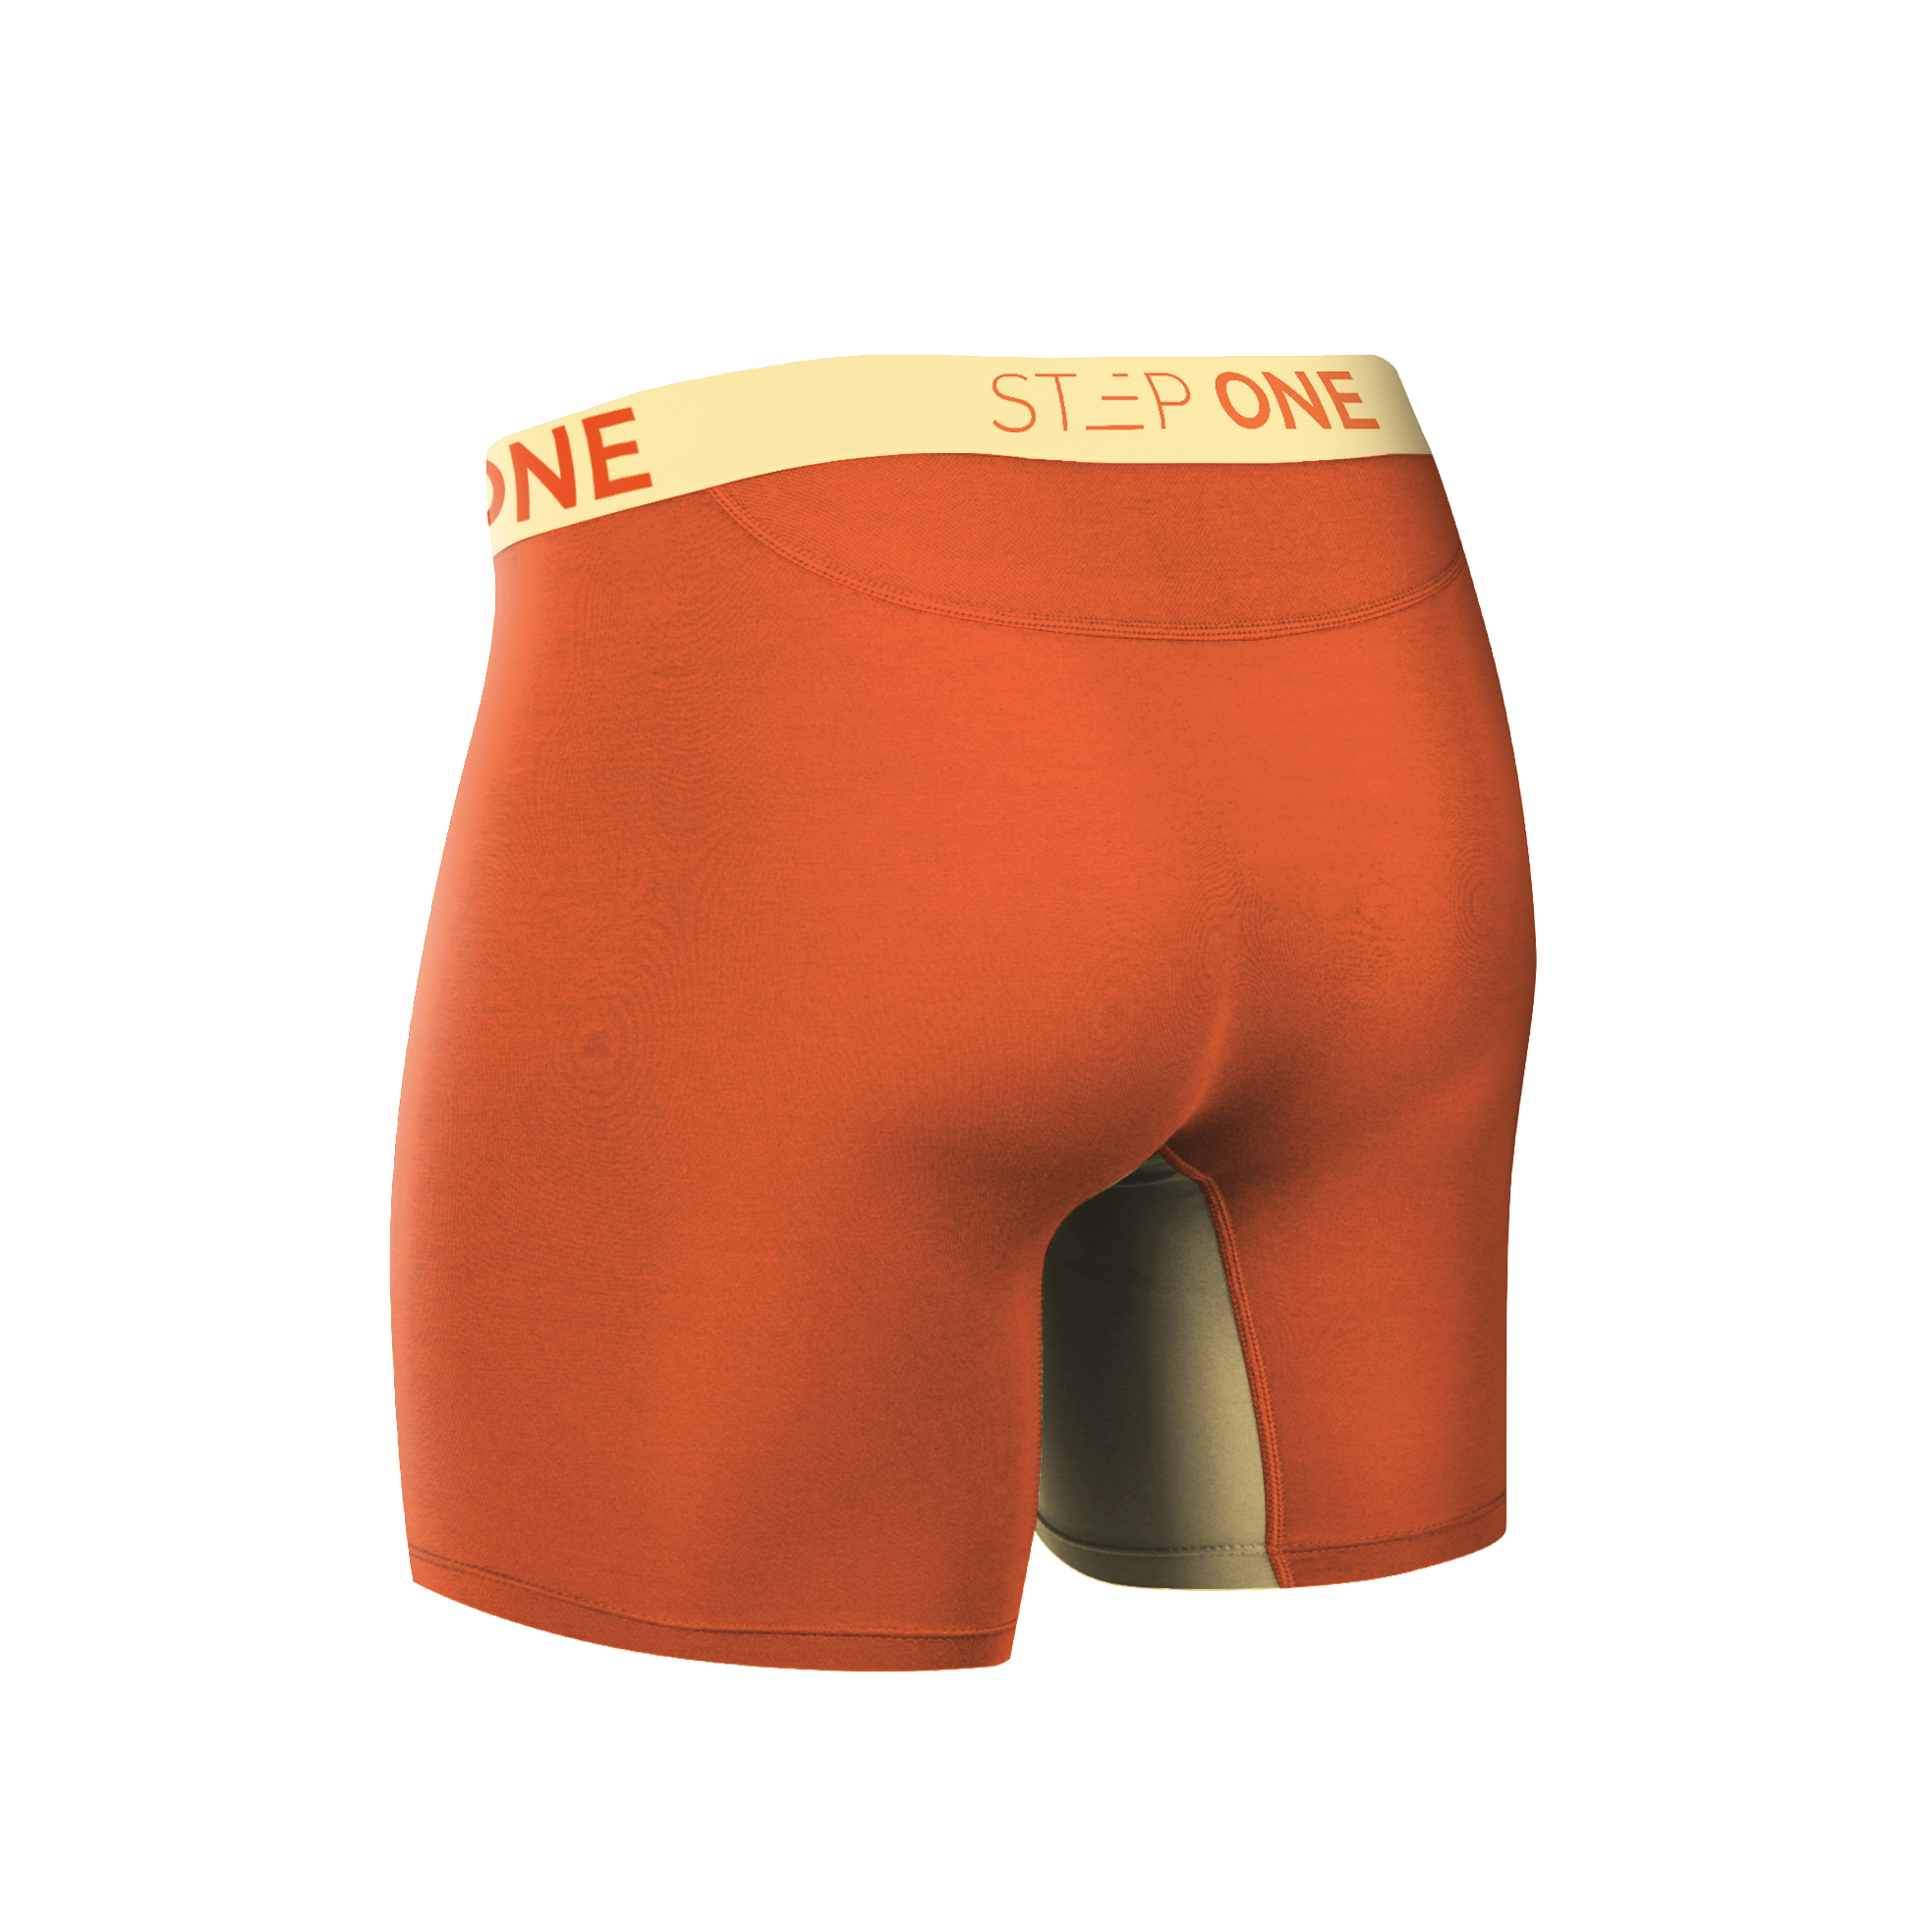 Boxer Brief - Donald Trunks - View 2